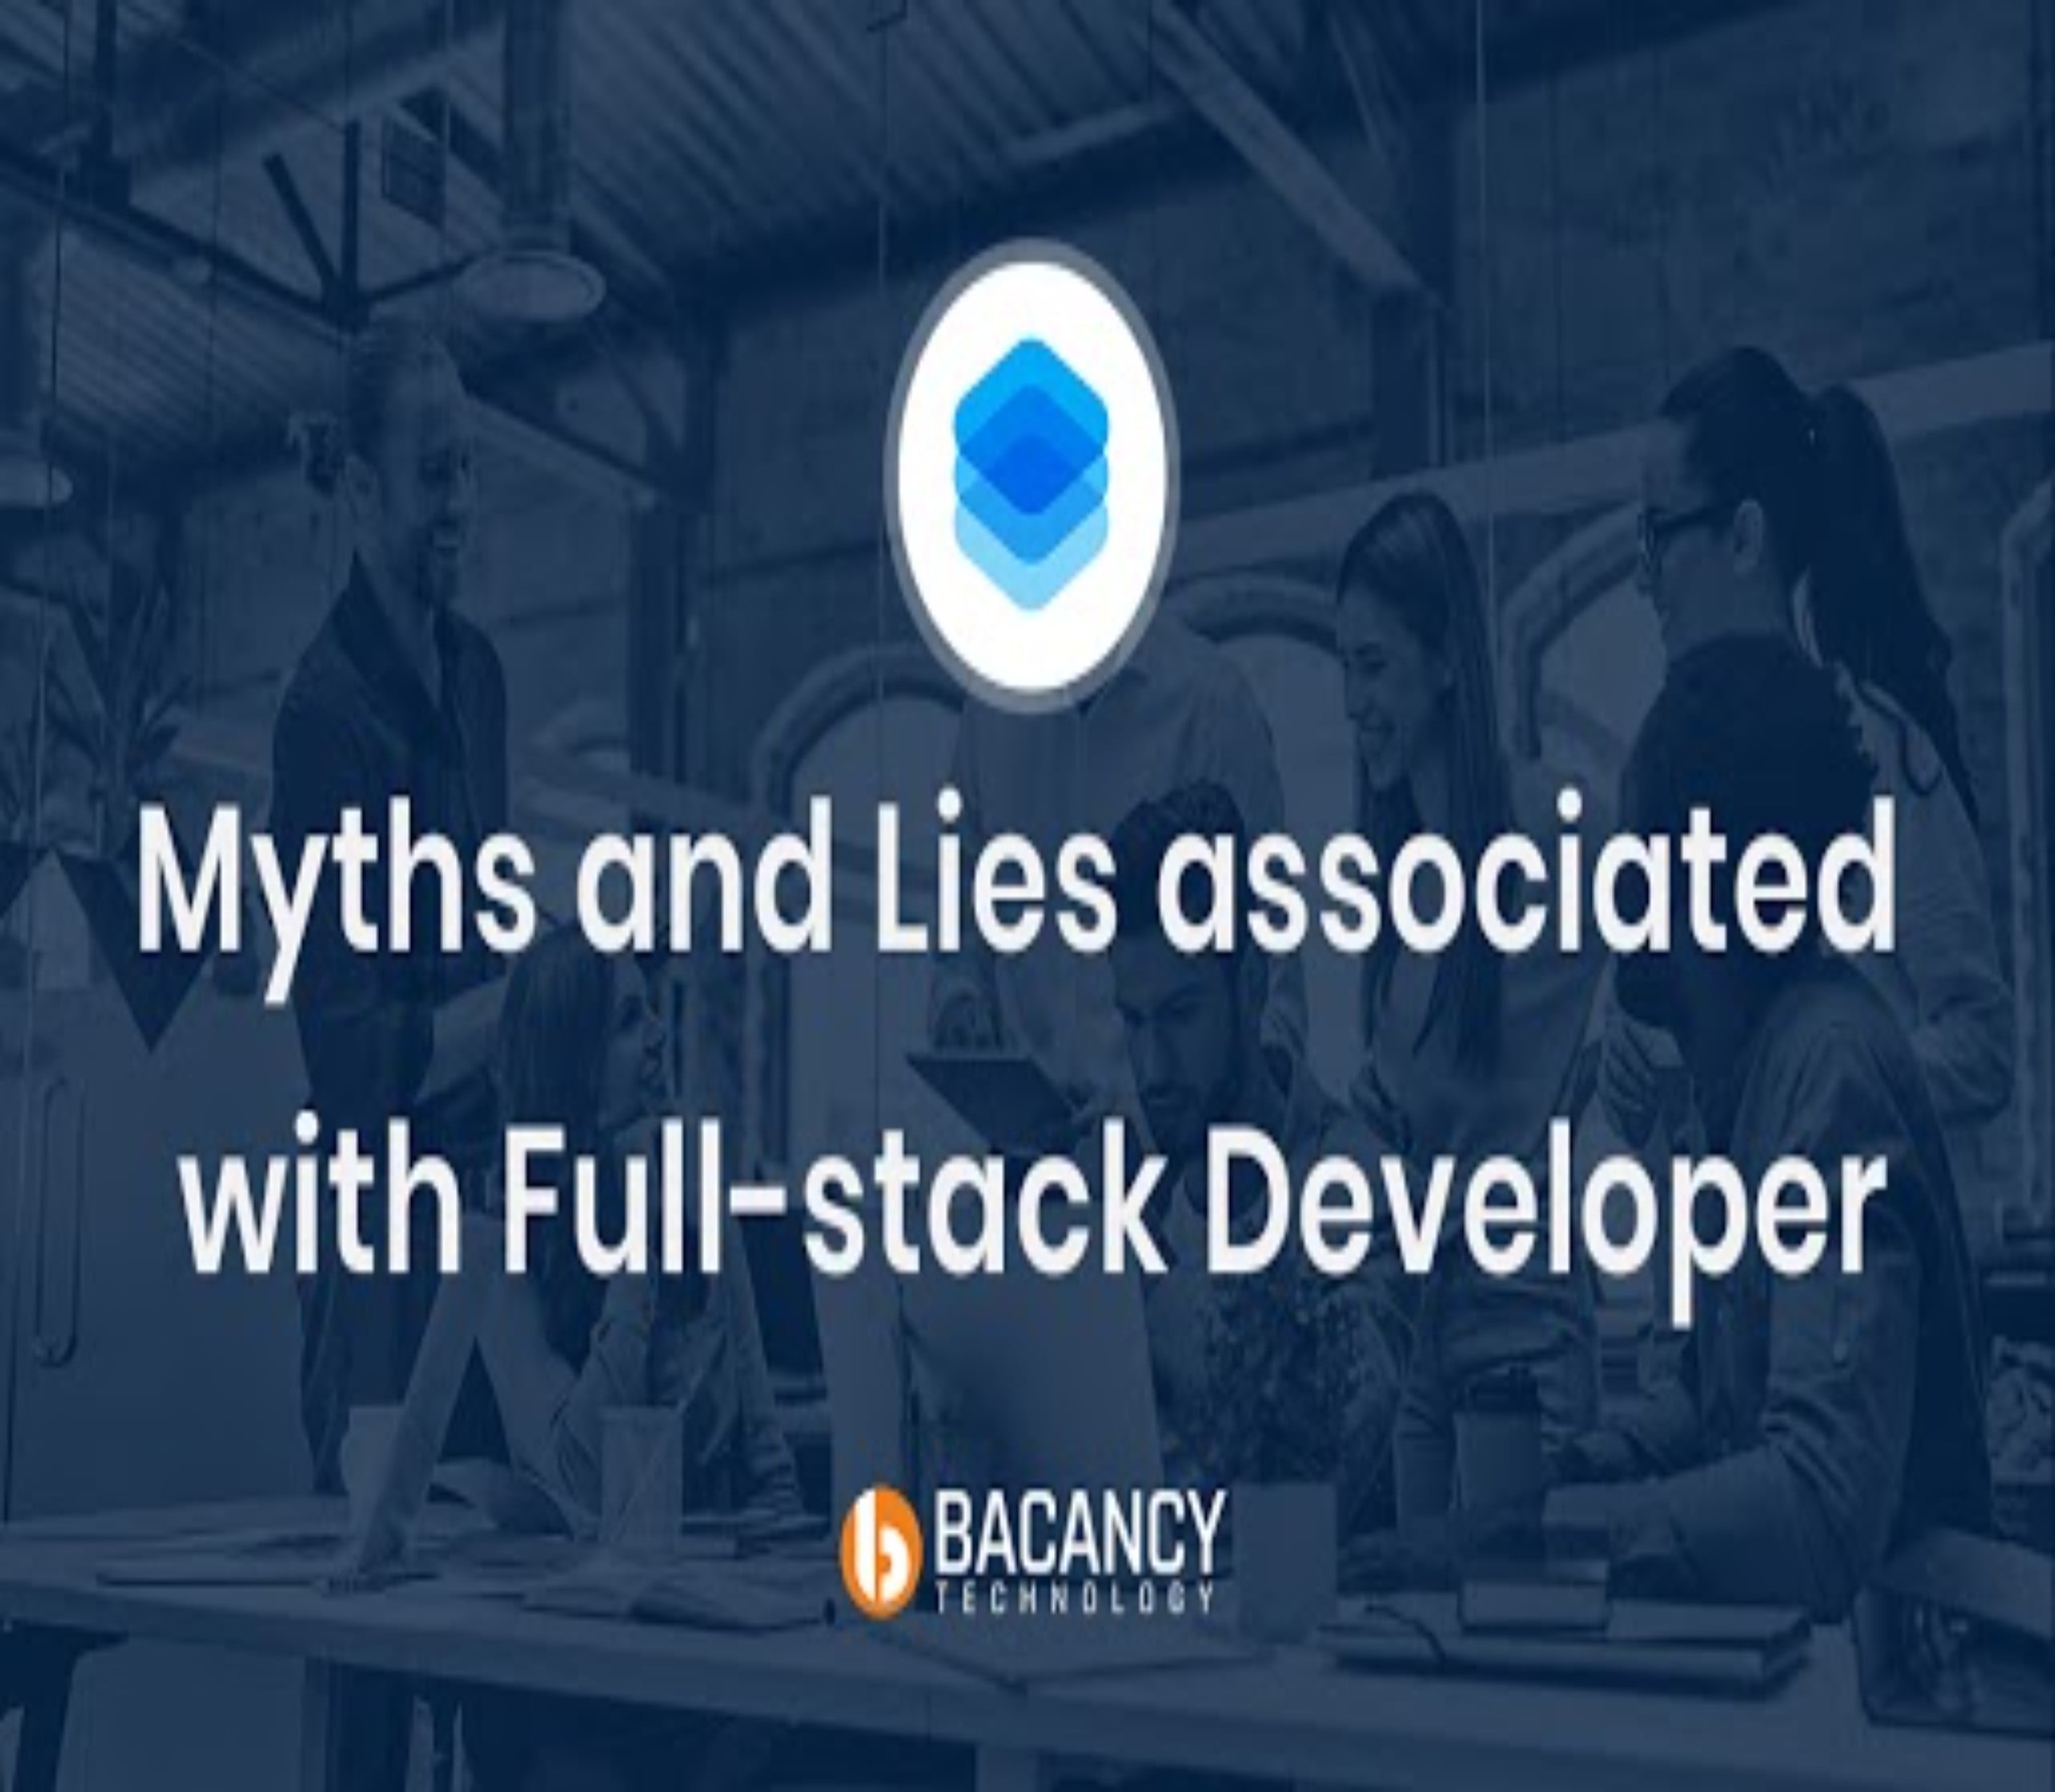 Is Full-stack Developers a Myth? Let’s Find Out